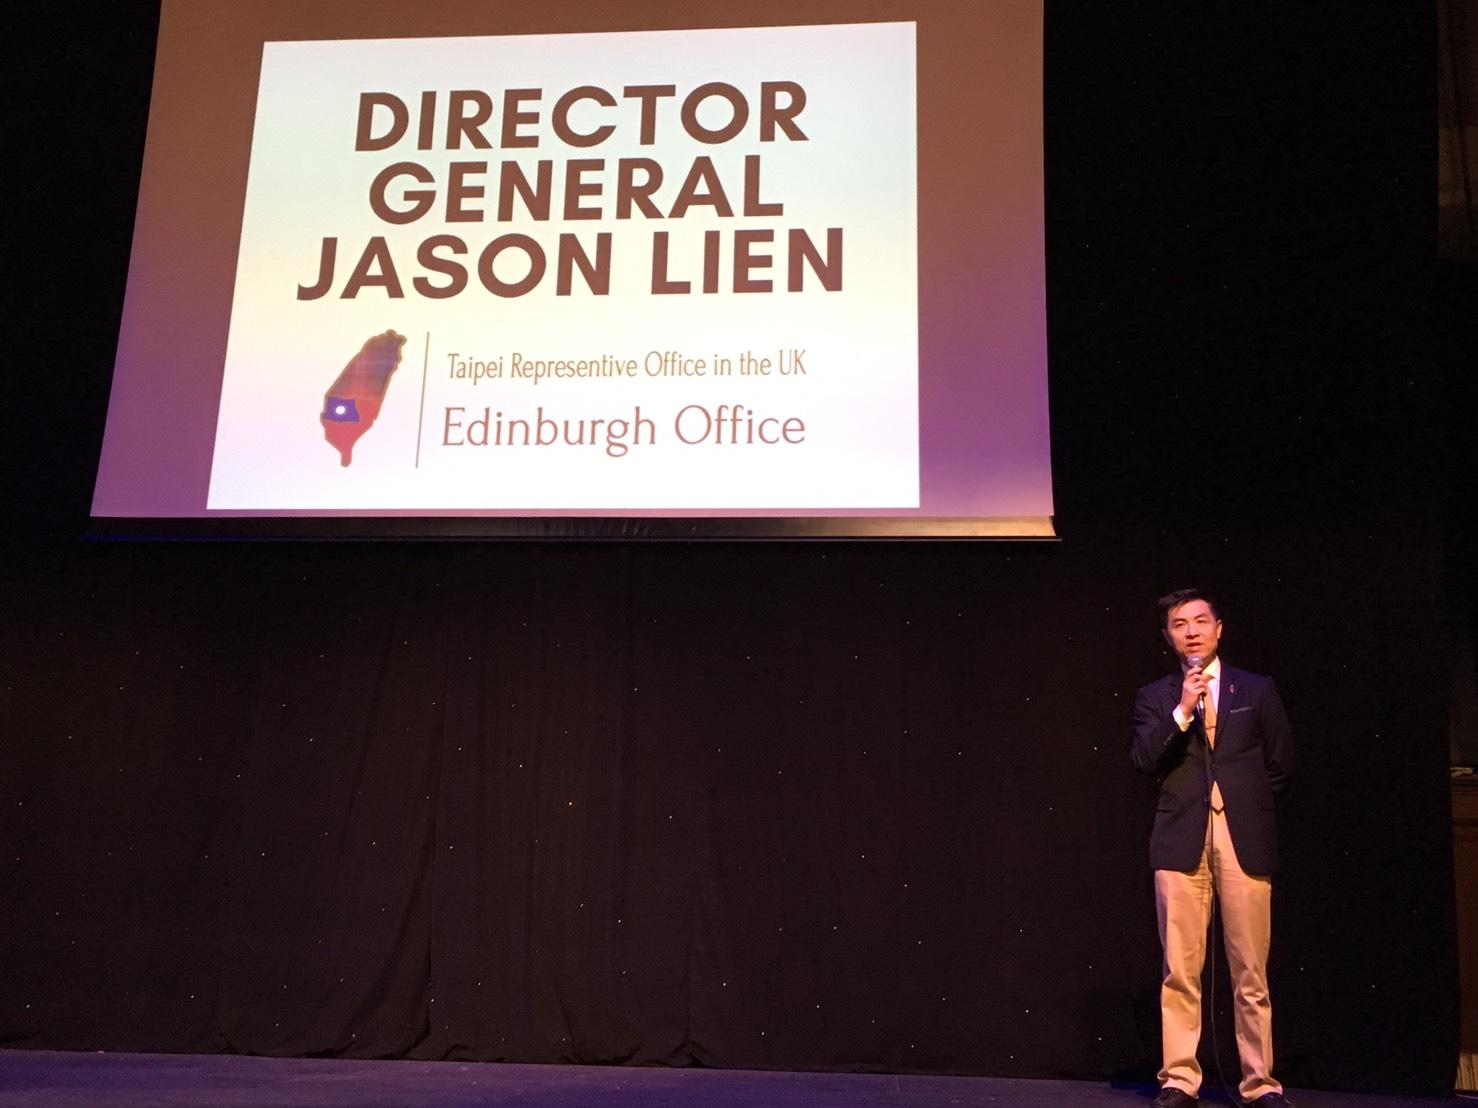 Hosted by the Edinburgh Taiwanese Student Society and sponsored by the Taipei Representative Office in the UK Edinburgh Office; Director General Jason Lien invited to give welcome remarks.